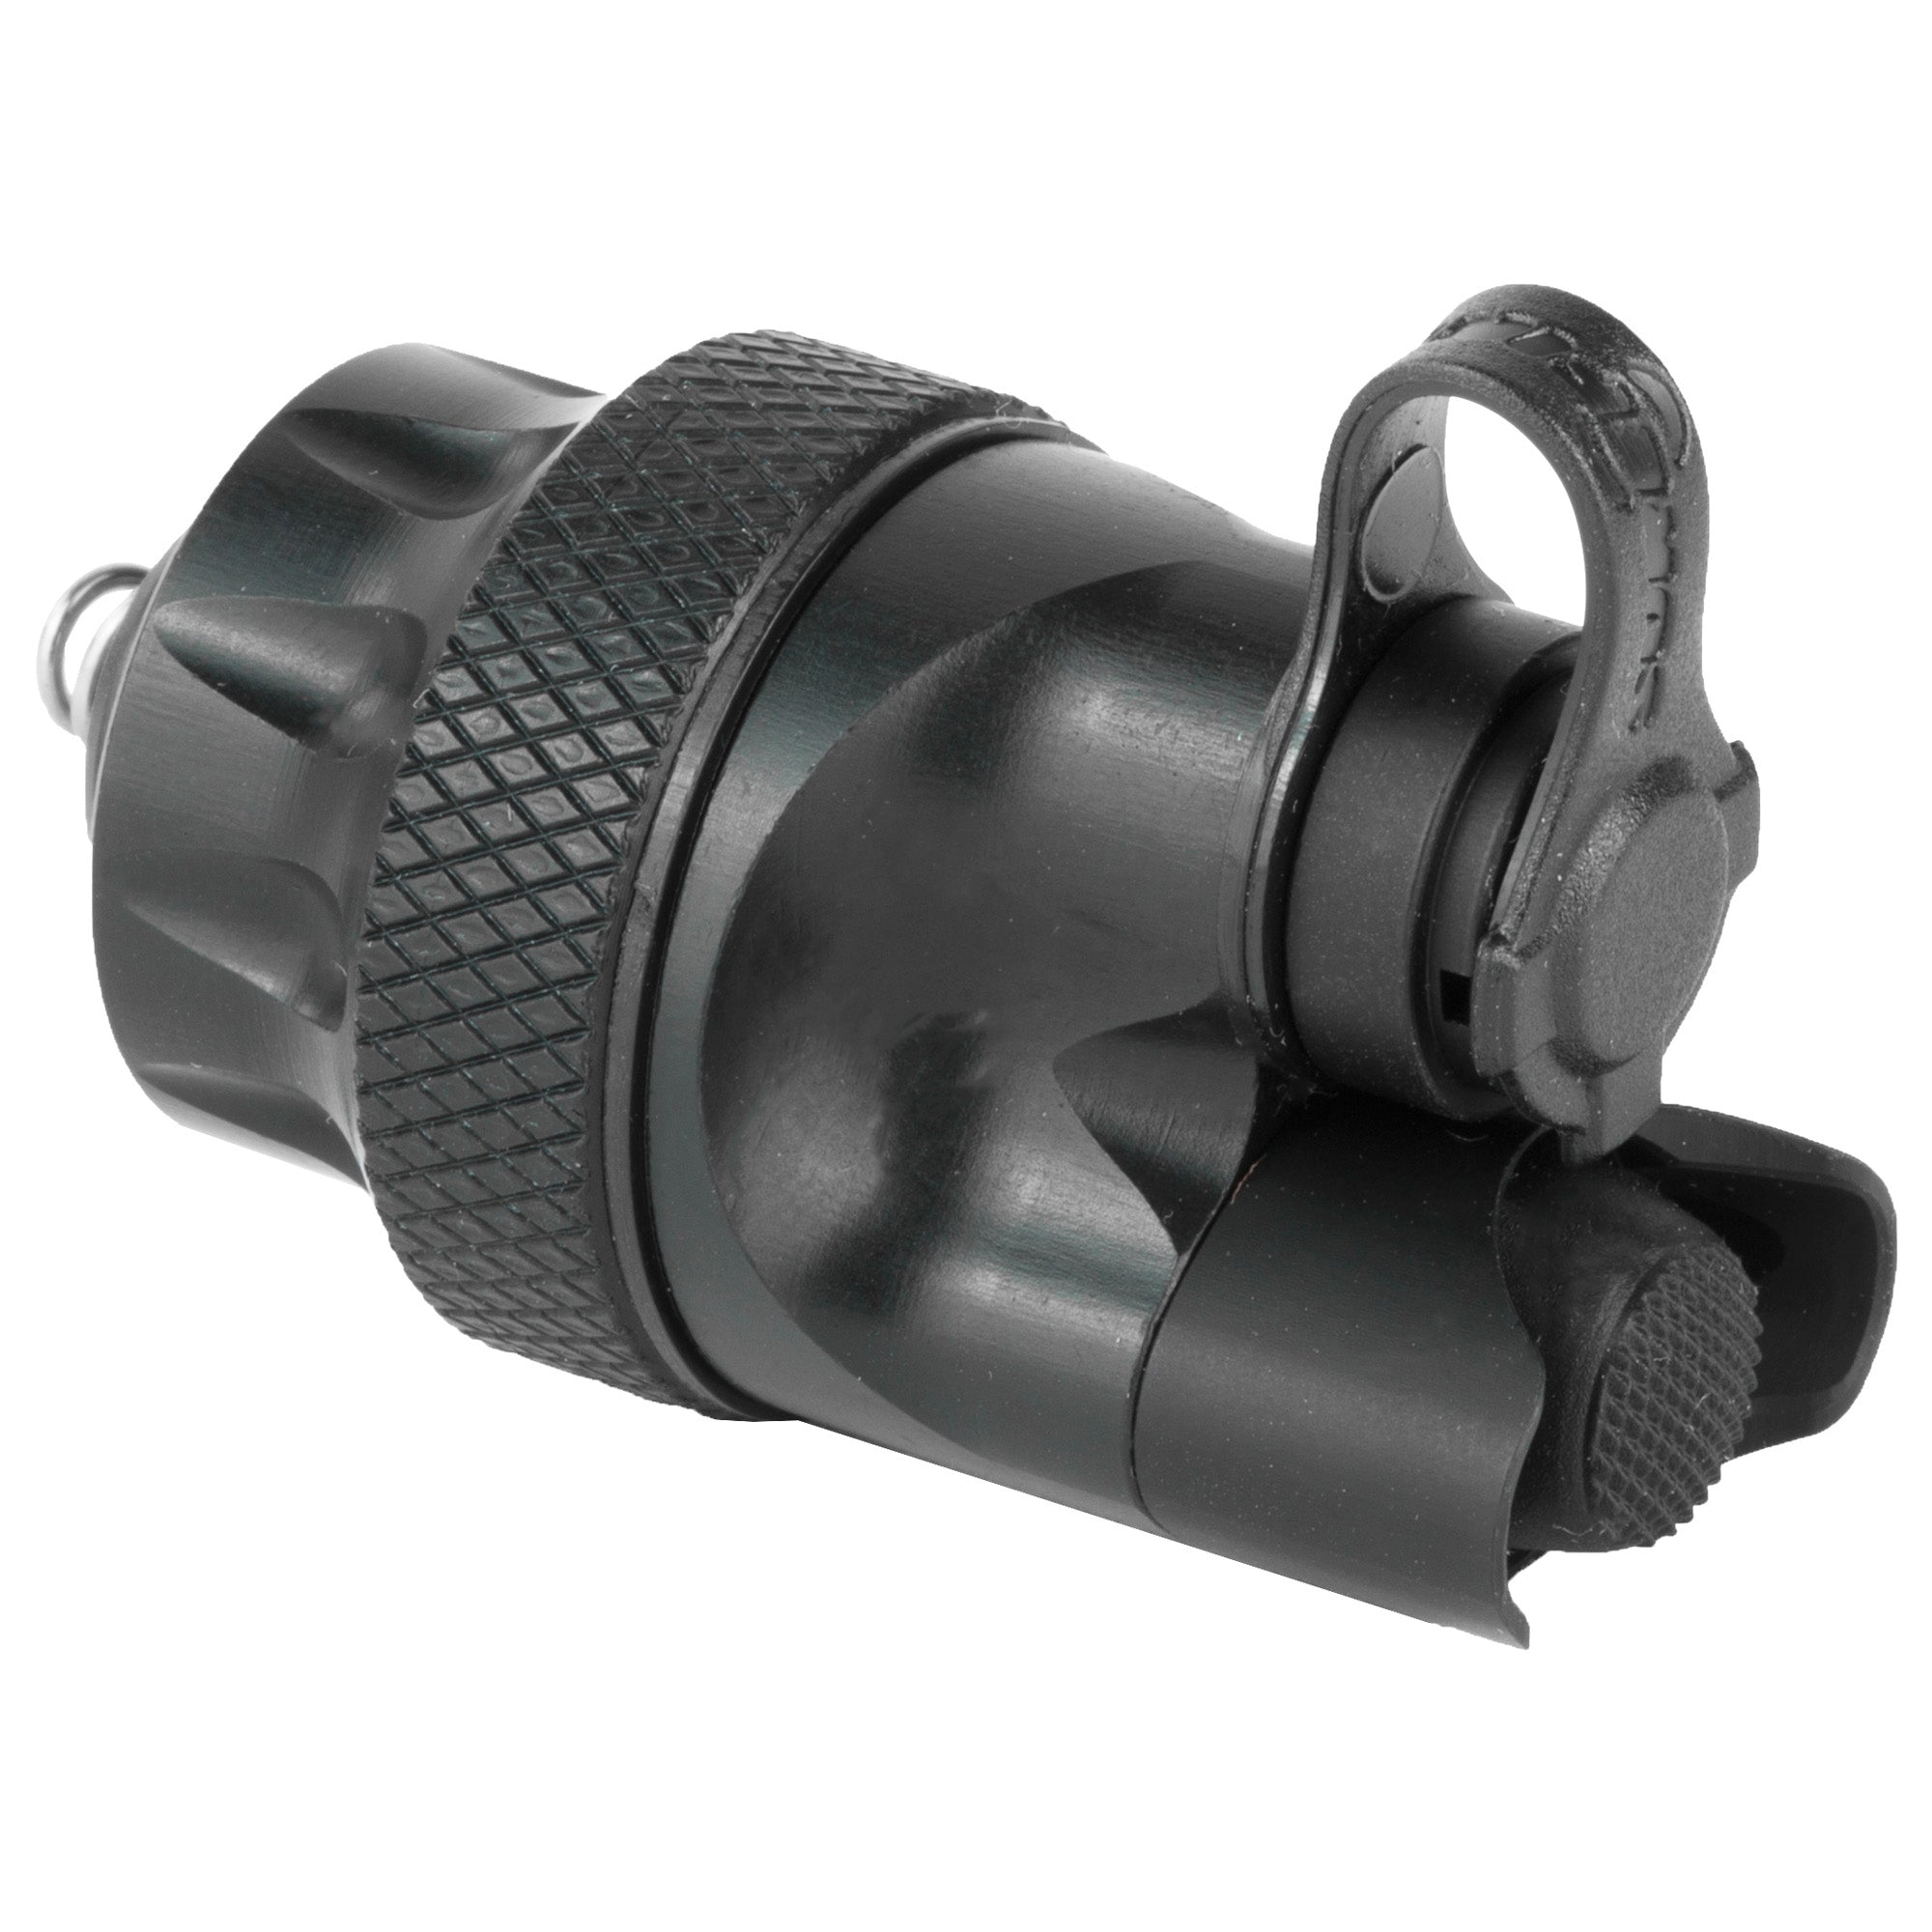 Surefire DS00 Scoutlight Dual Switch Assembly in black, designed for use with Surefire tape switches, featuring waterproof housing and a click on/off button.